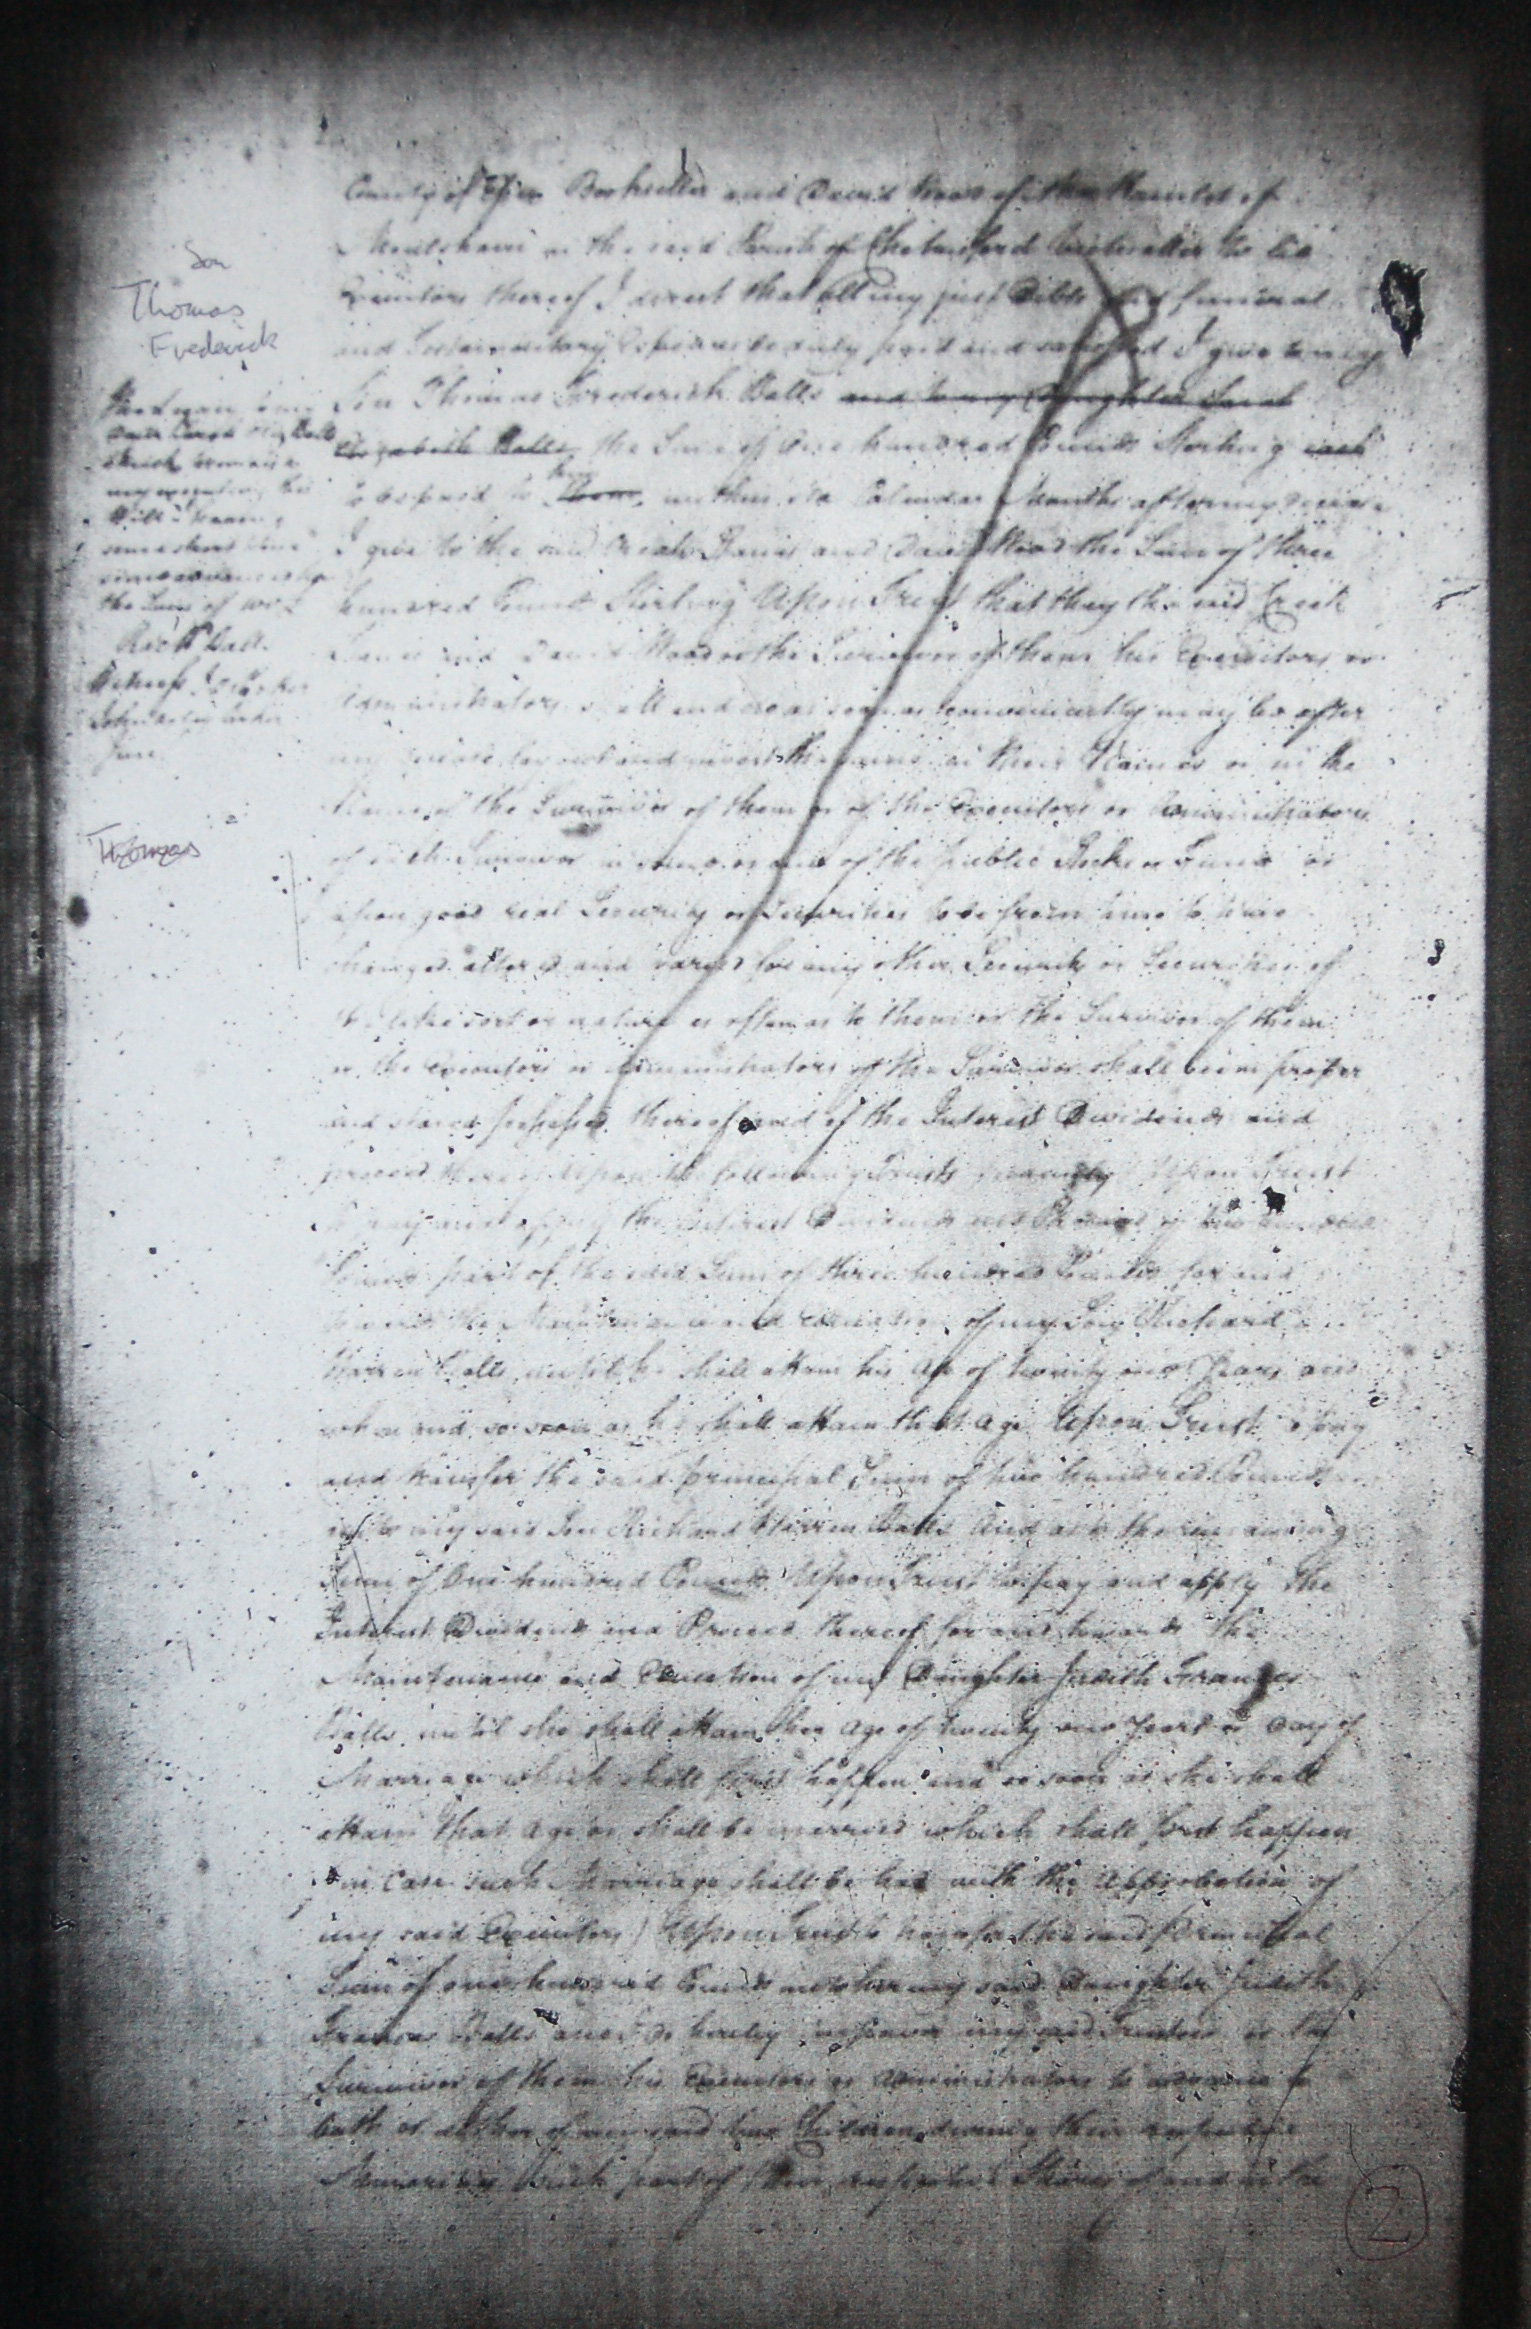 The will of Richard Balls, 1798, page 2. This page confirms sons Thomas Frederick and Richard Warren, daughter Sarah Elizabeth crossed out presumably because she married Thomas Bearman around the time of writing, and daughter Judith Frances.